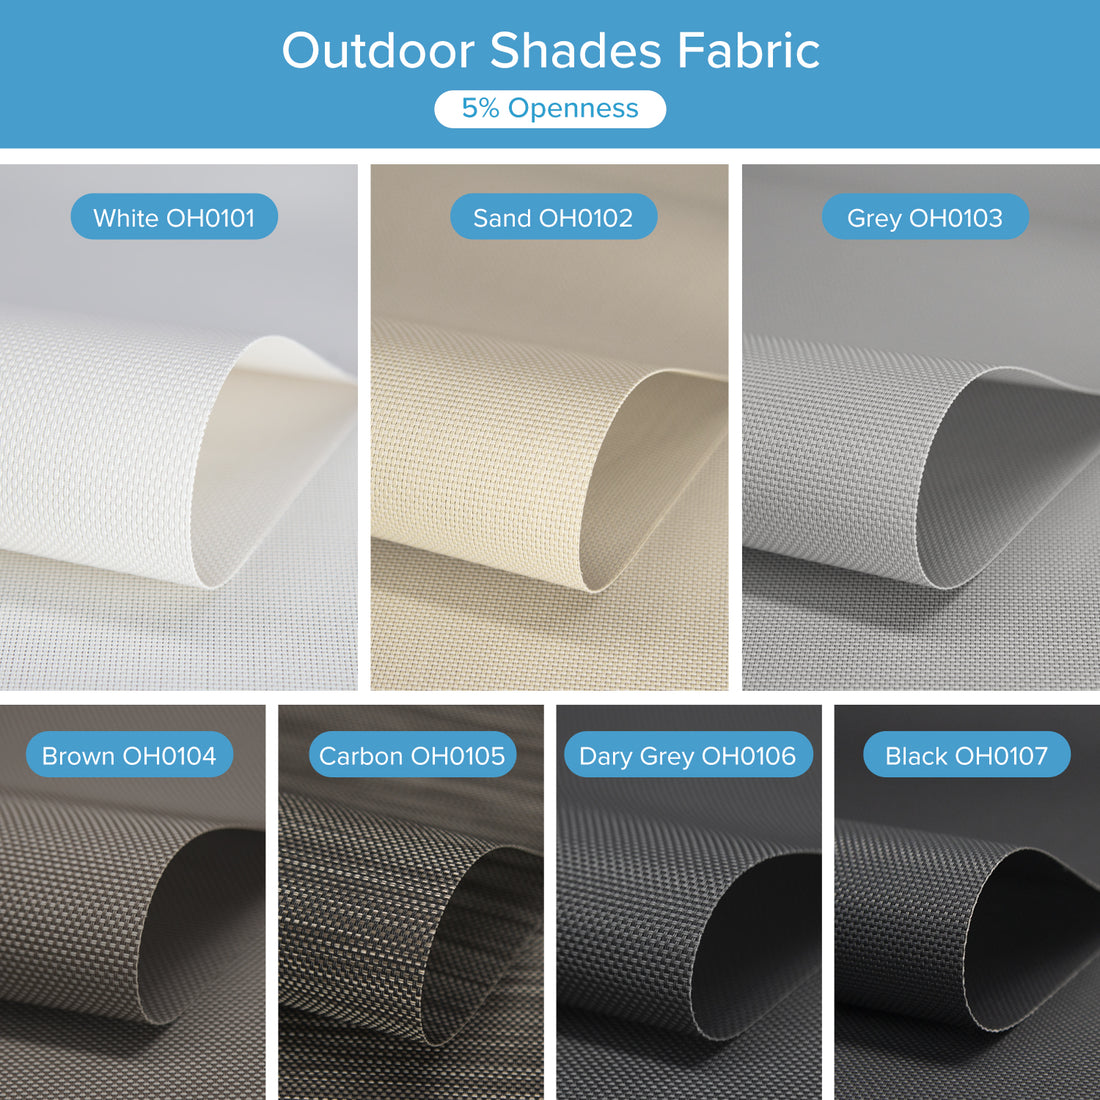 Outdoor Shade Fabric Samples